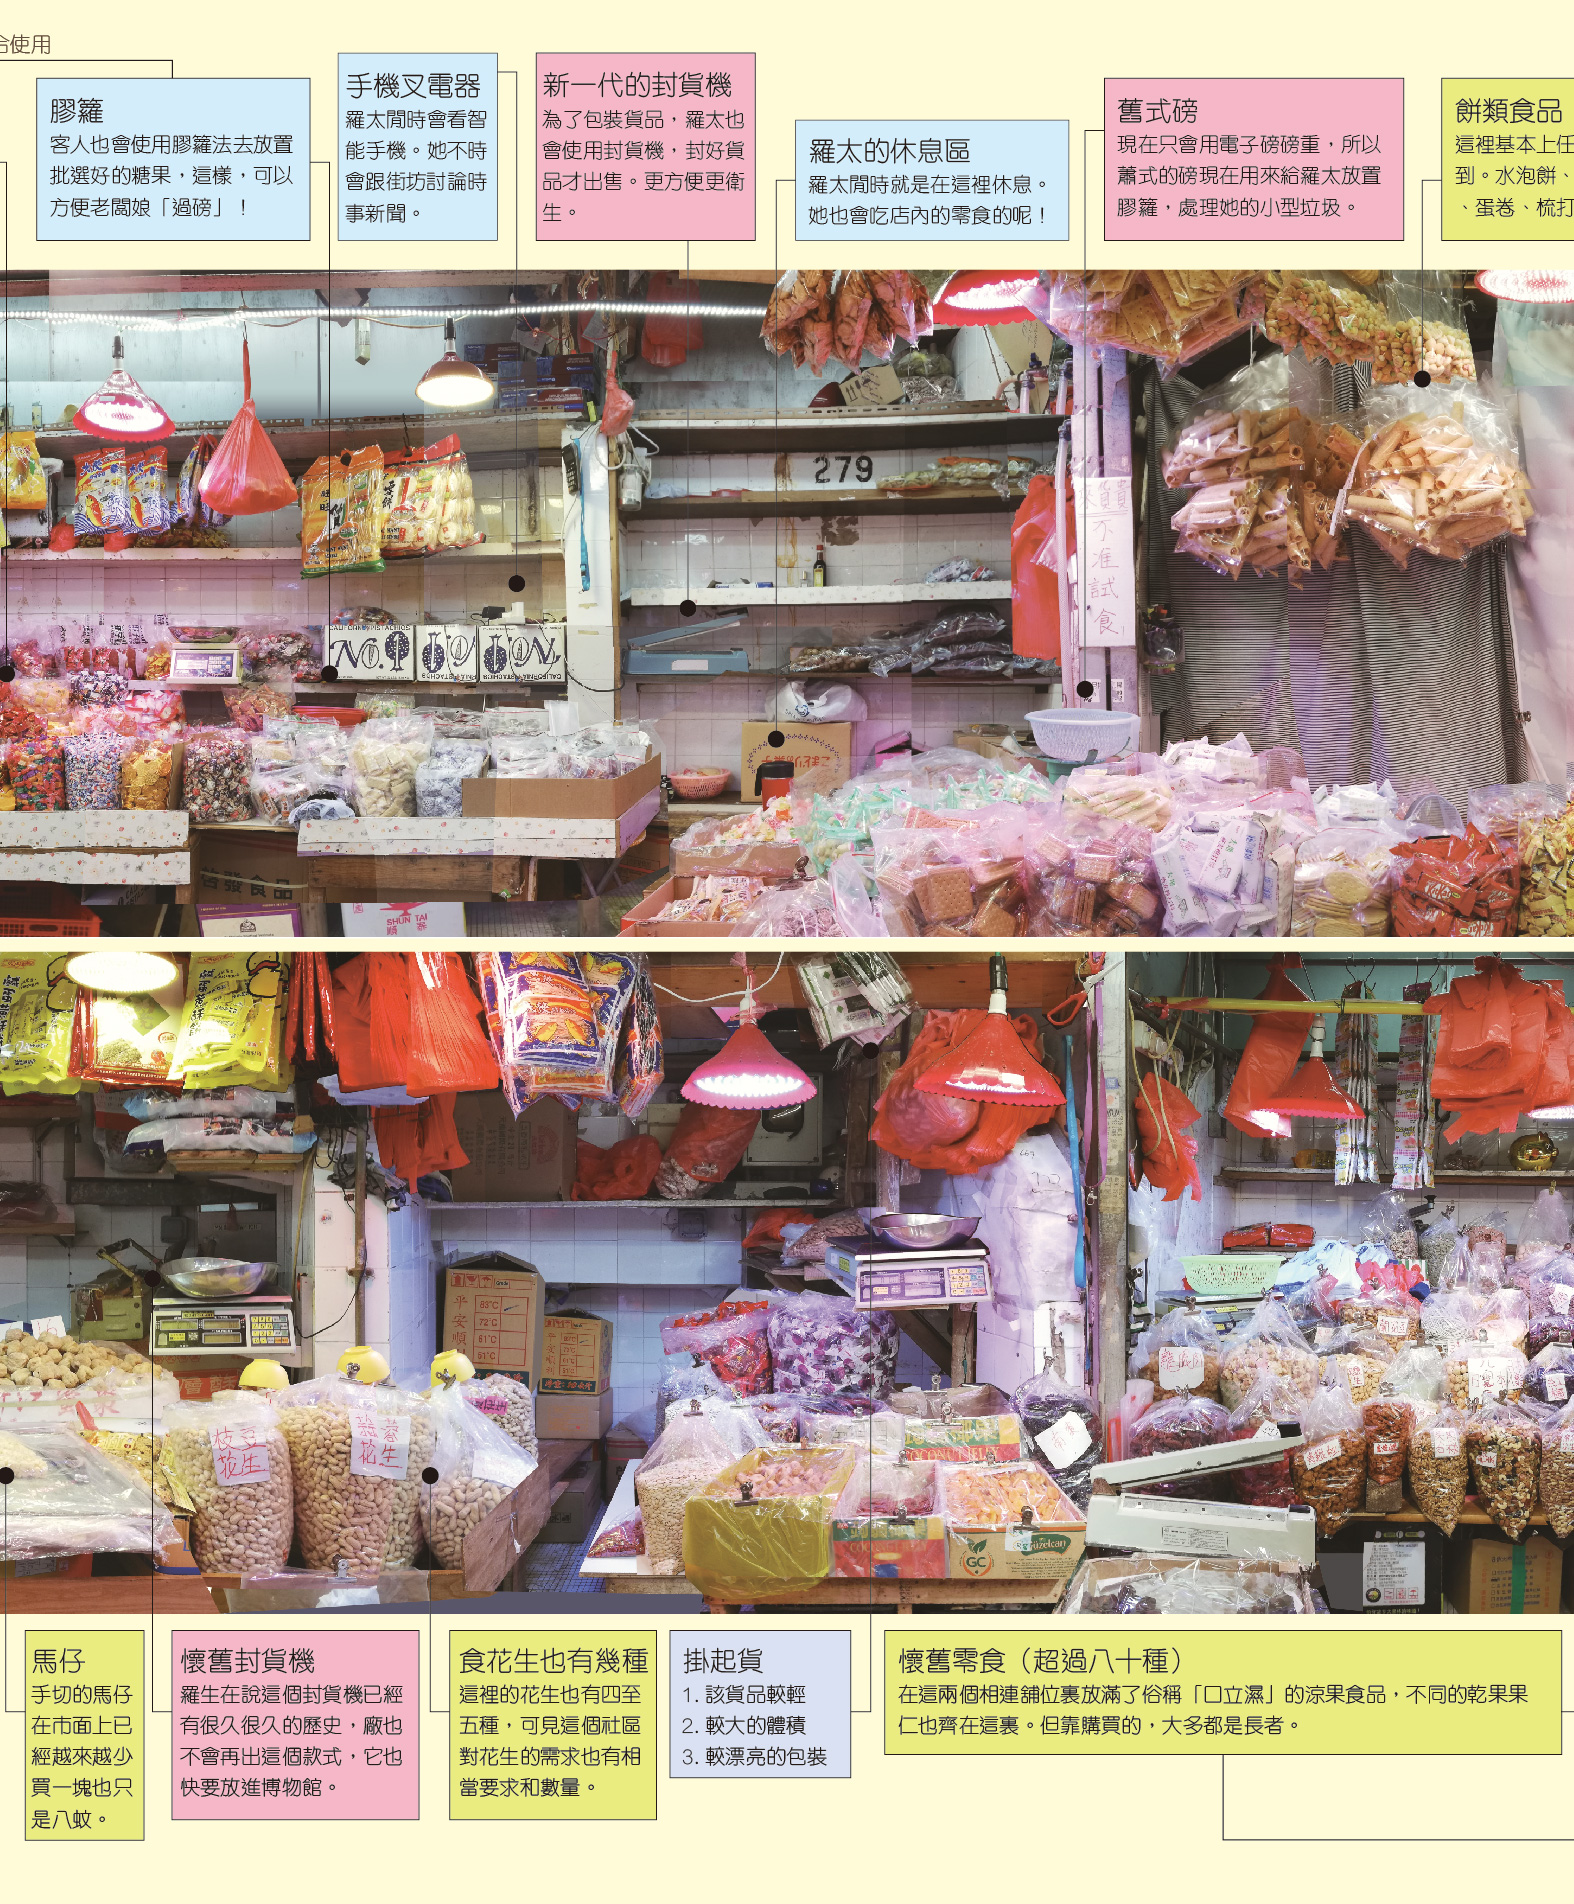 Shifting Environmentsbut itself stores some unique knowledge and folk wisdom, which can only be made visible with patience and care. In this project, three market stores are selected: Mei Kei Clothes Store, Mrs. Law's Snack Store and Mr. Ng's Butcher Store.